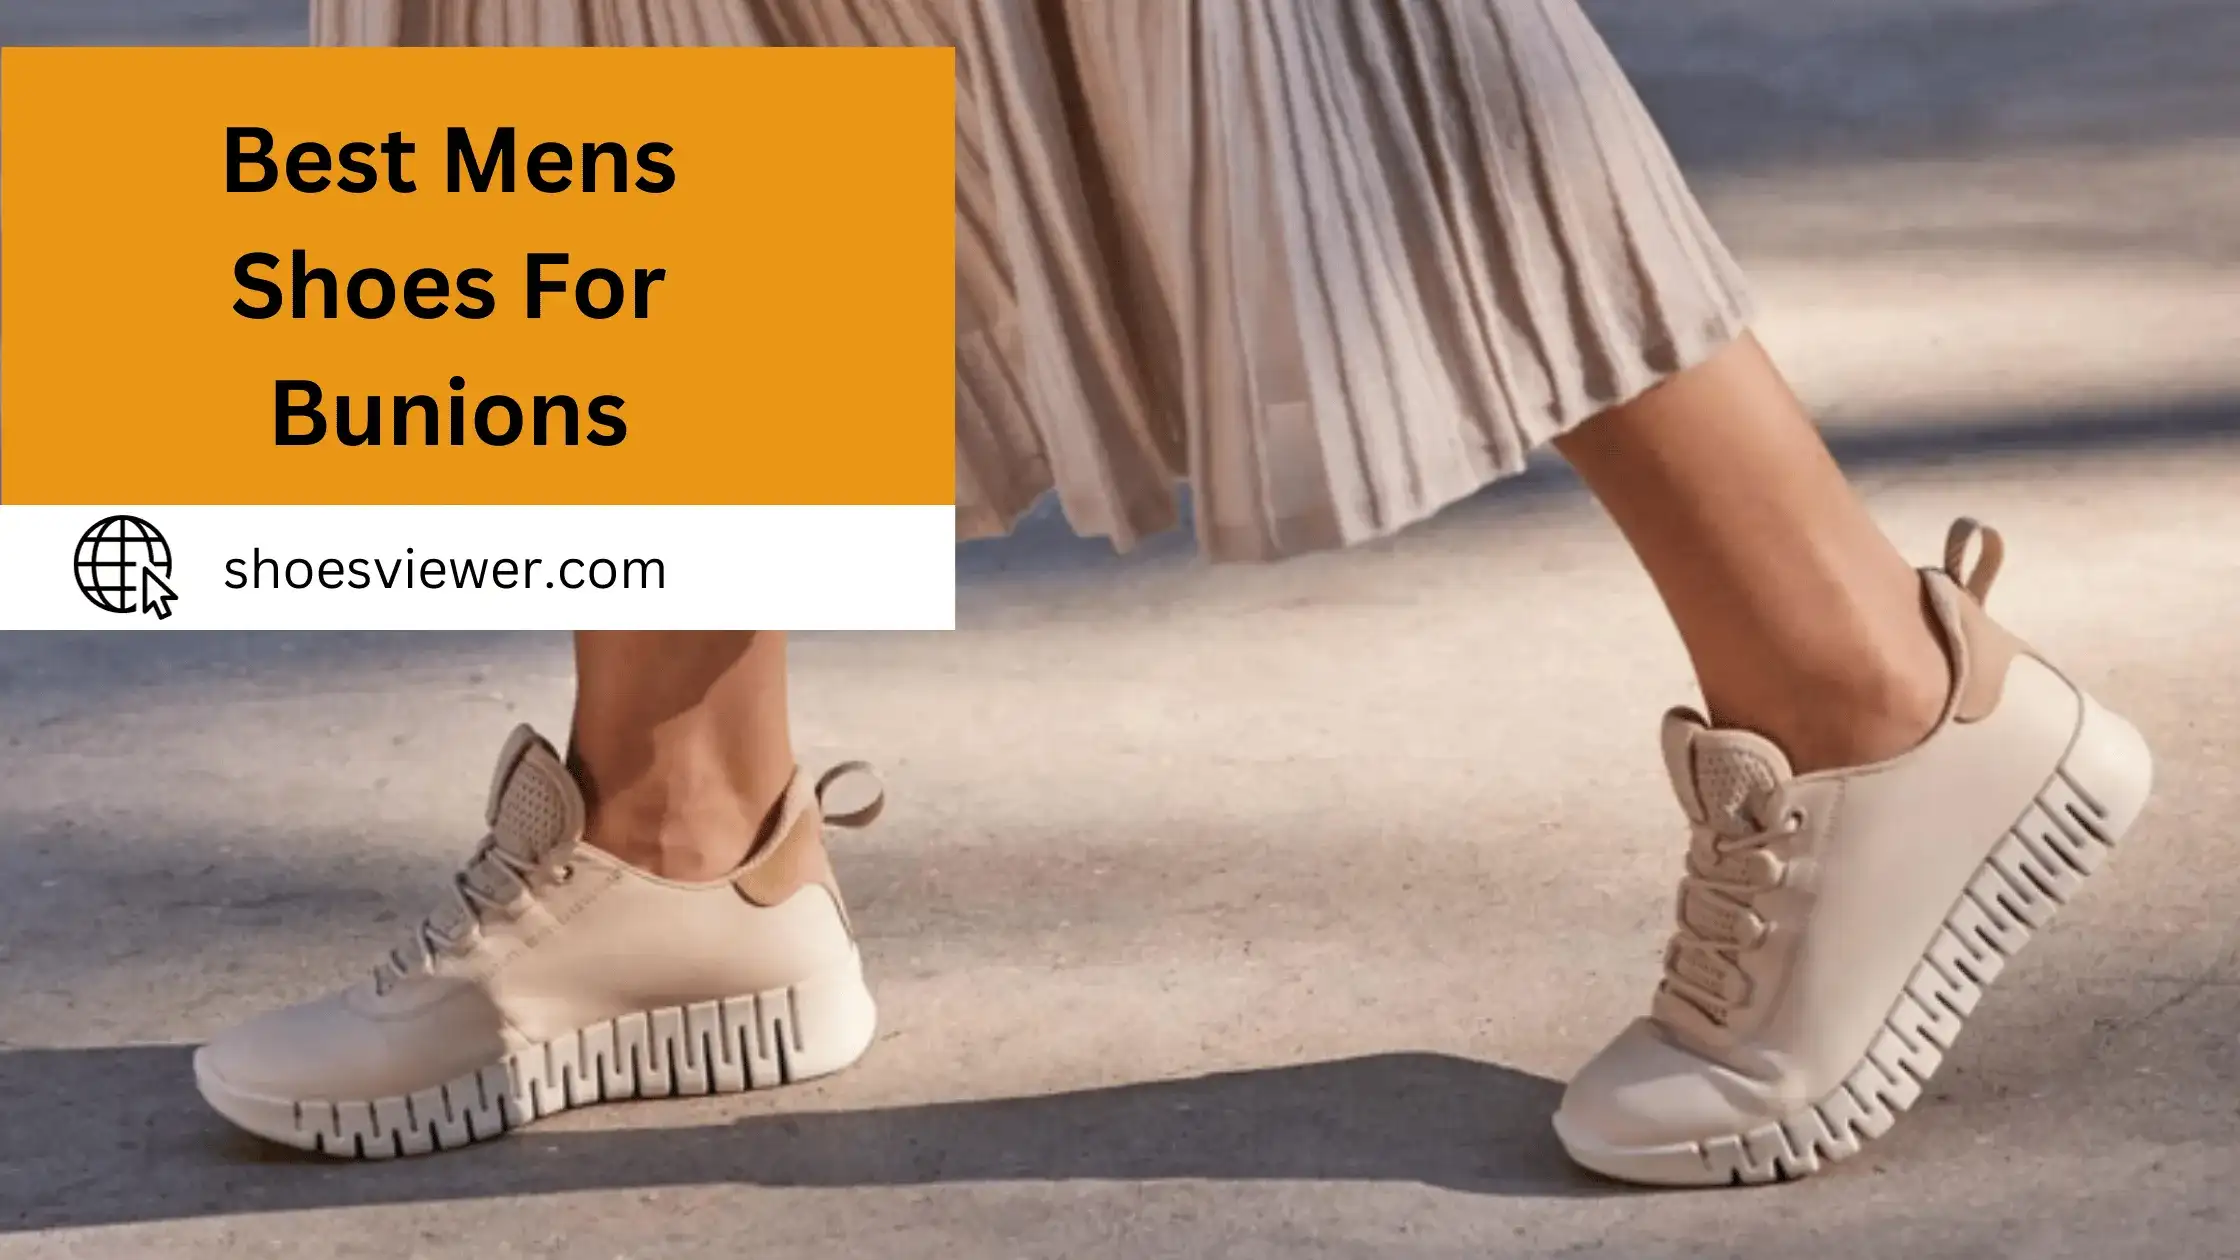 Revealing Top 10 Best Mens Shoes For Bunions